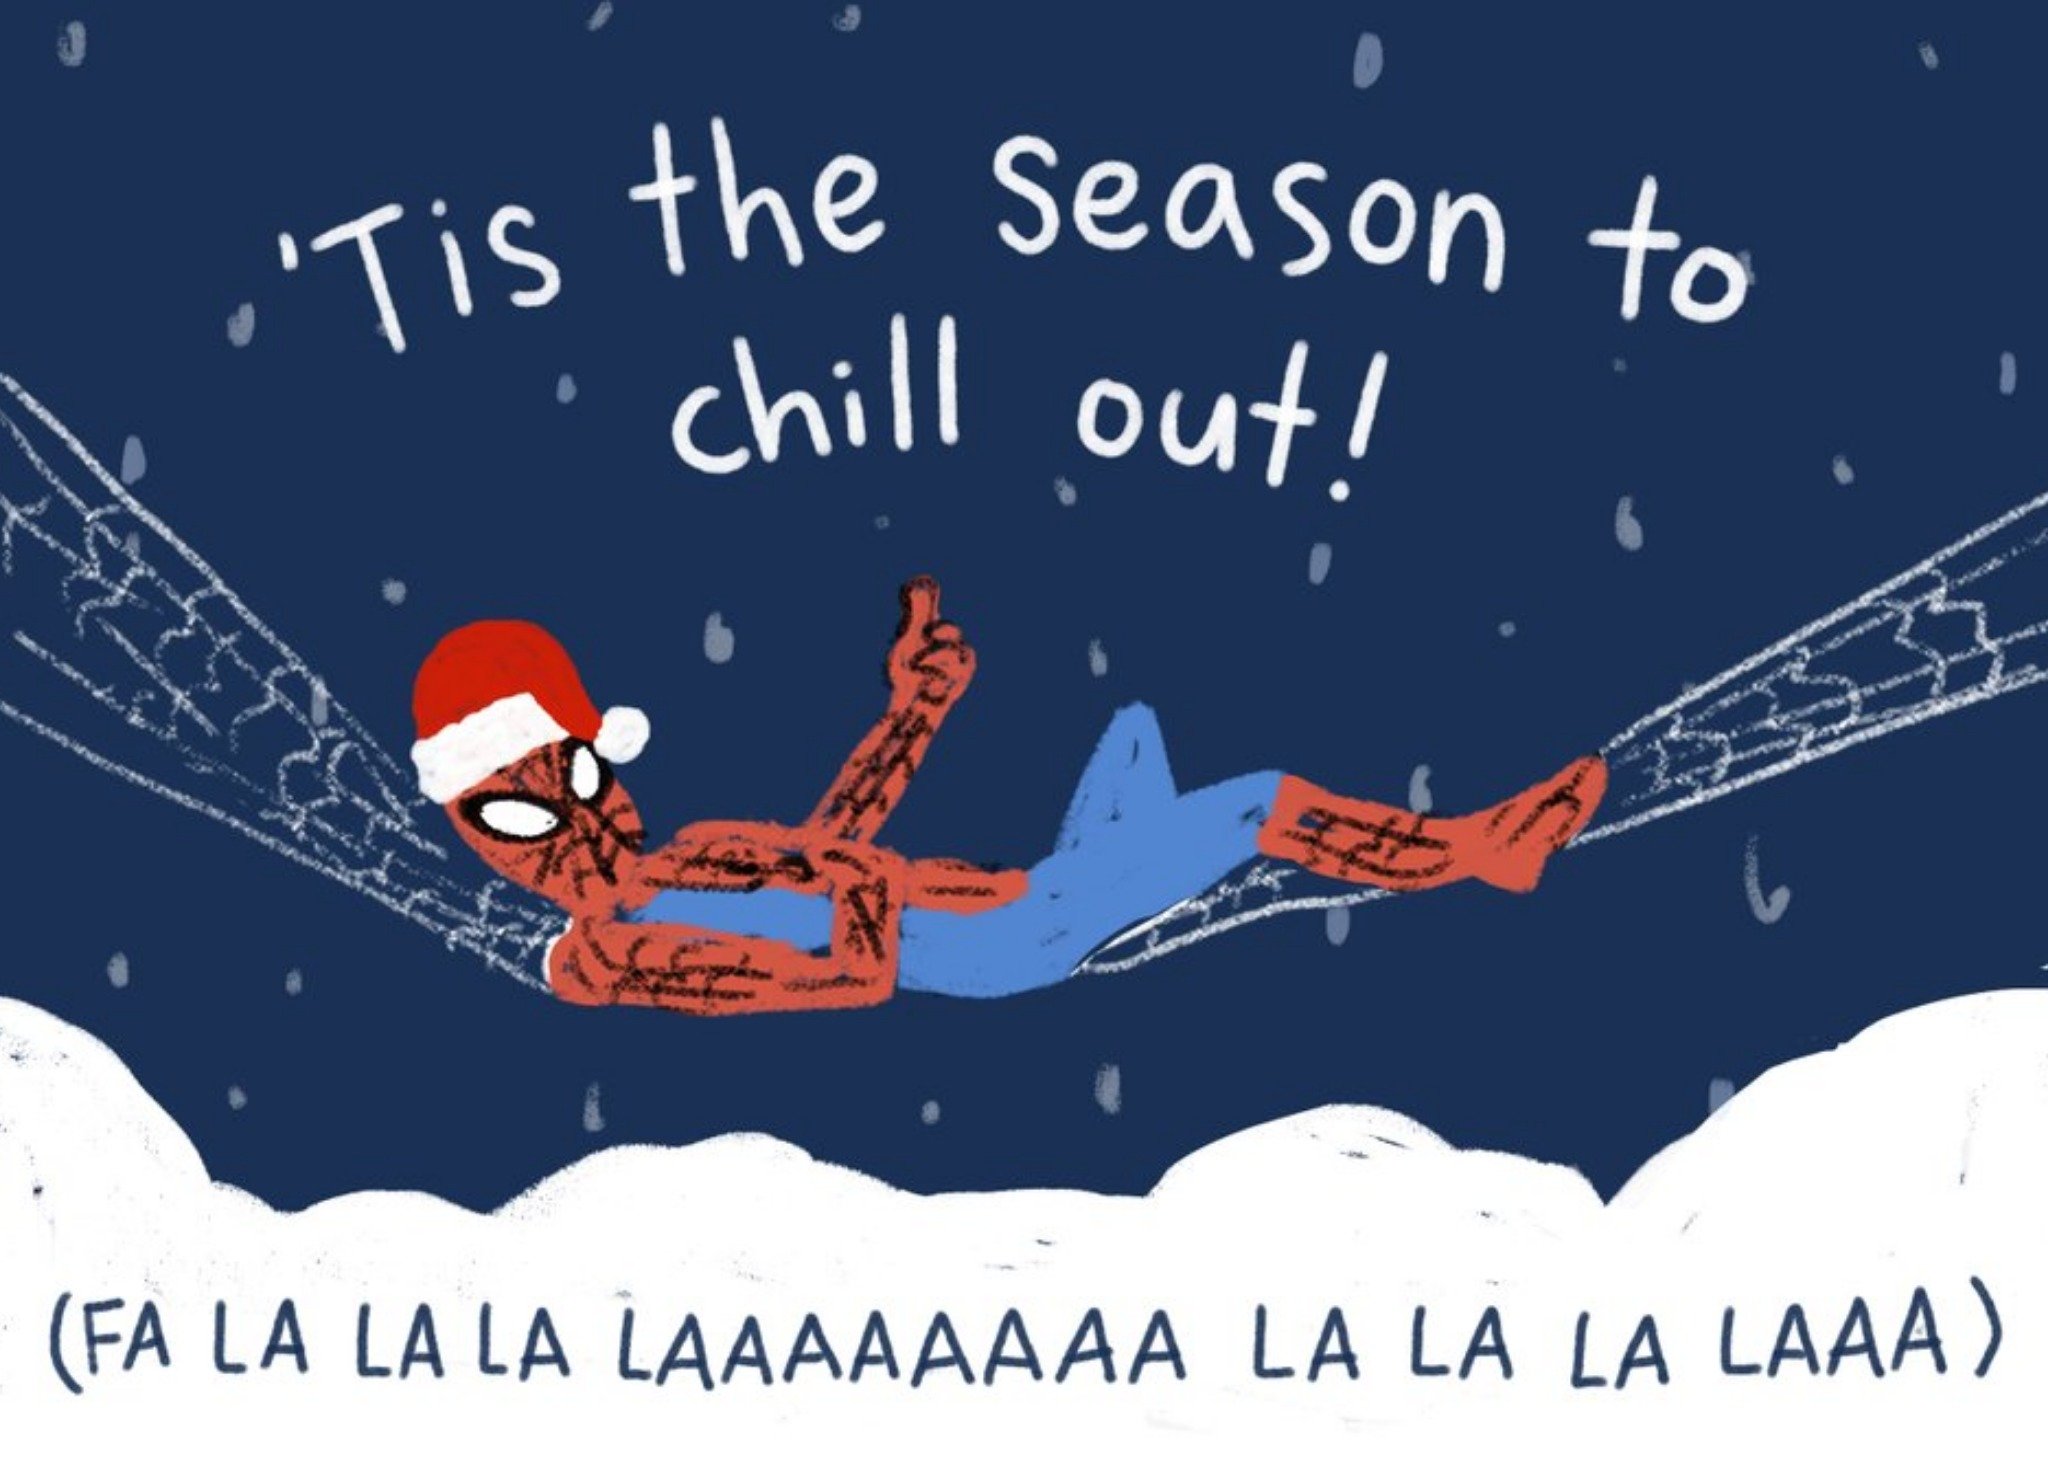 Disney Marvel Spiderman Tis The Season To Chill Out Christmas Card Ecard